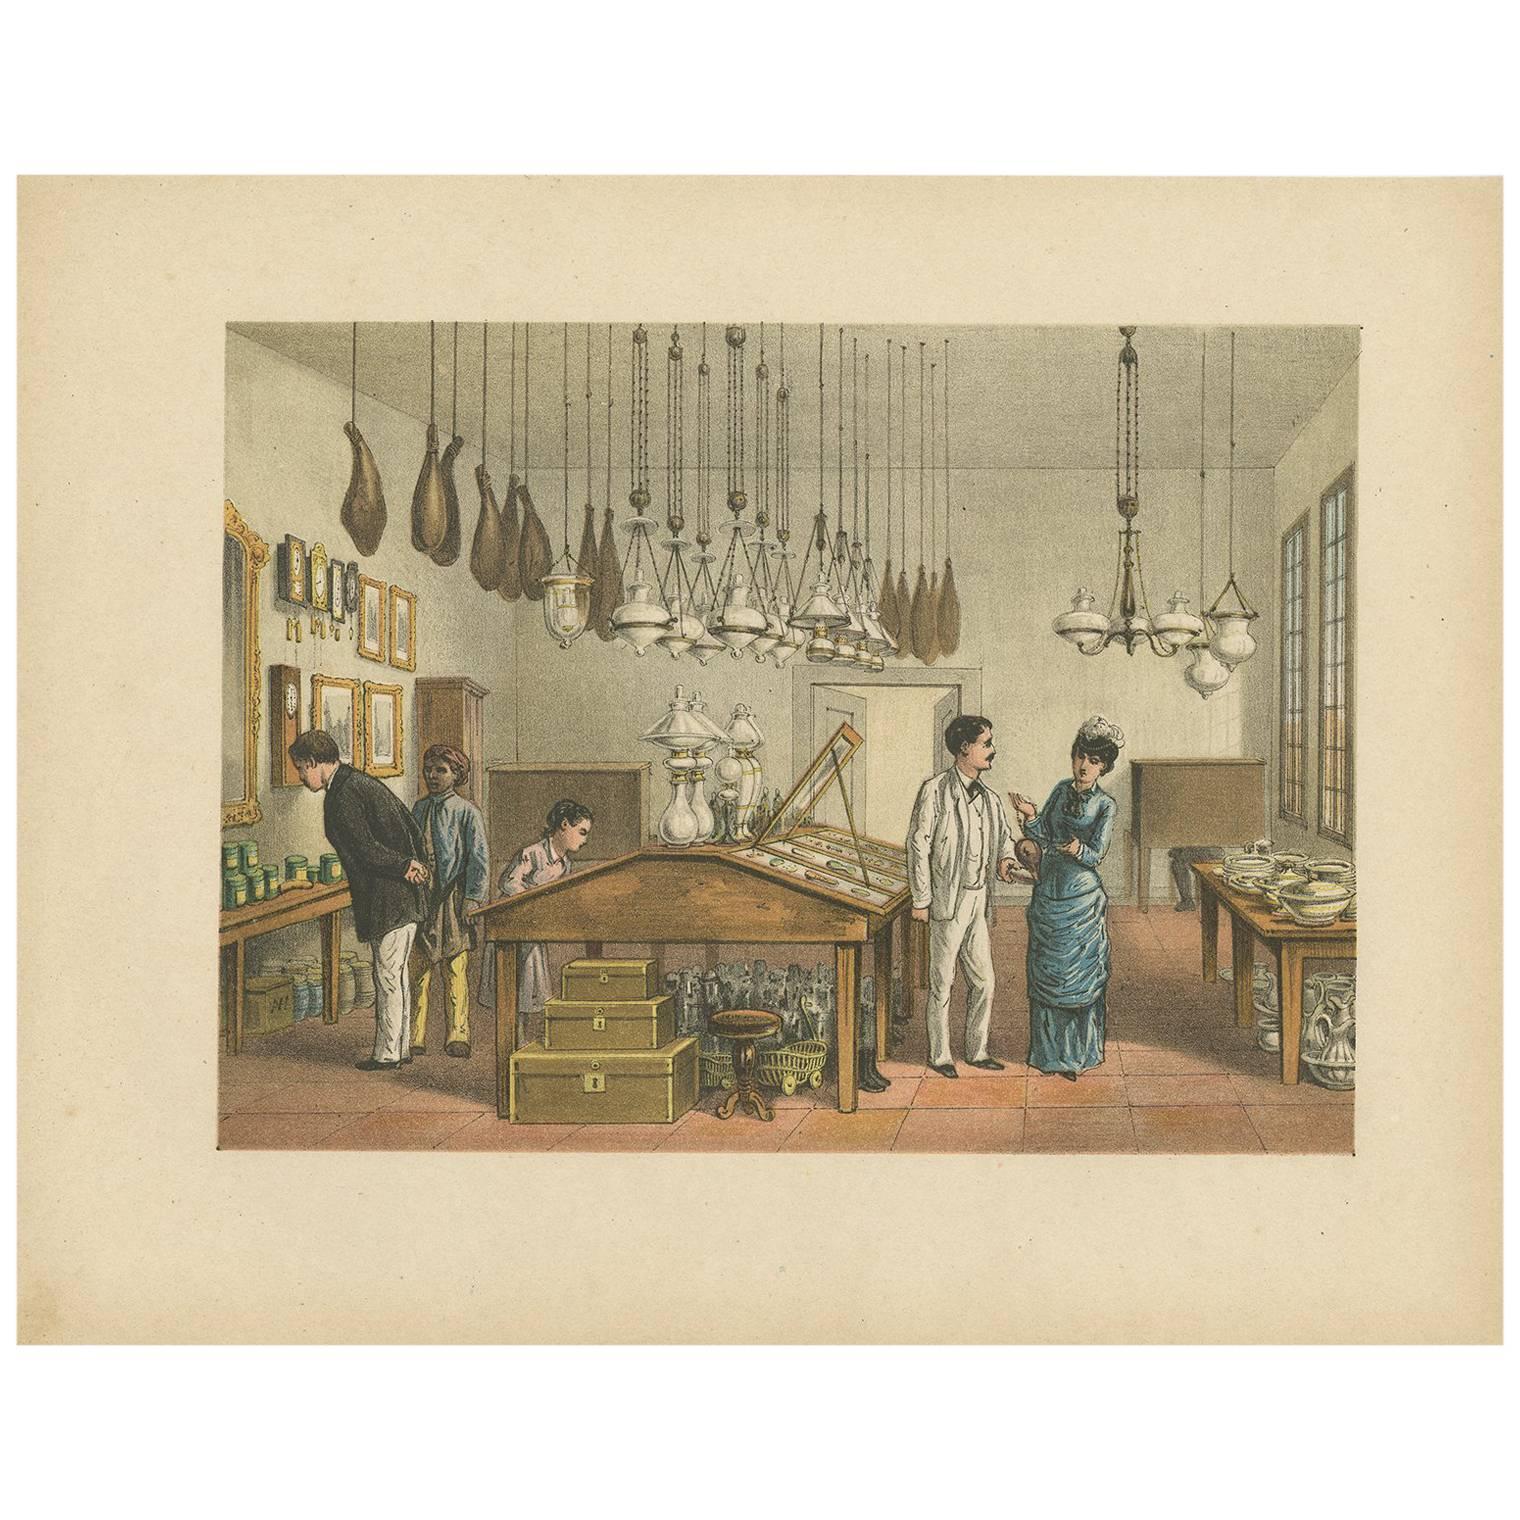 Antique Print of a Store in Batavia 'Indonesia' by M.T.H. Perelaer, 1888 For Sale